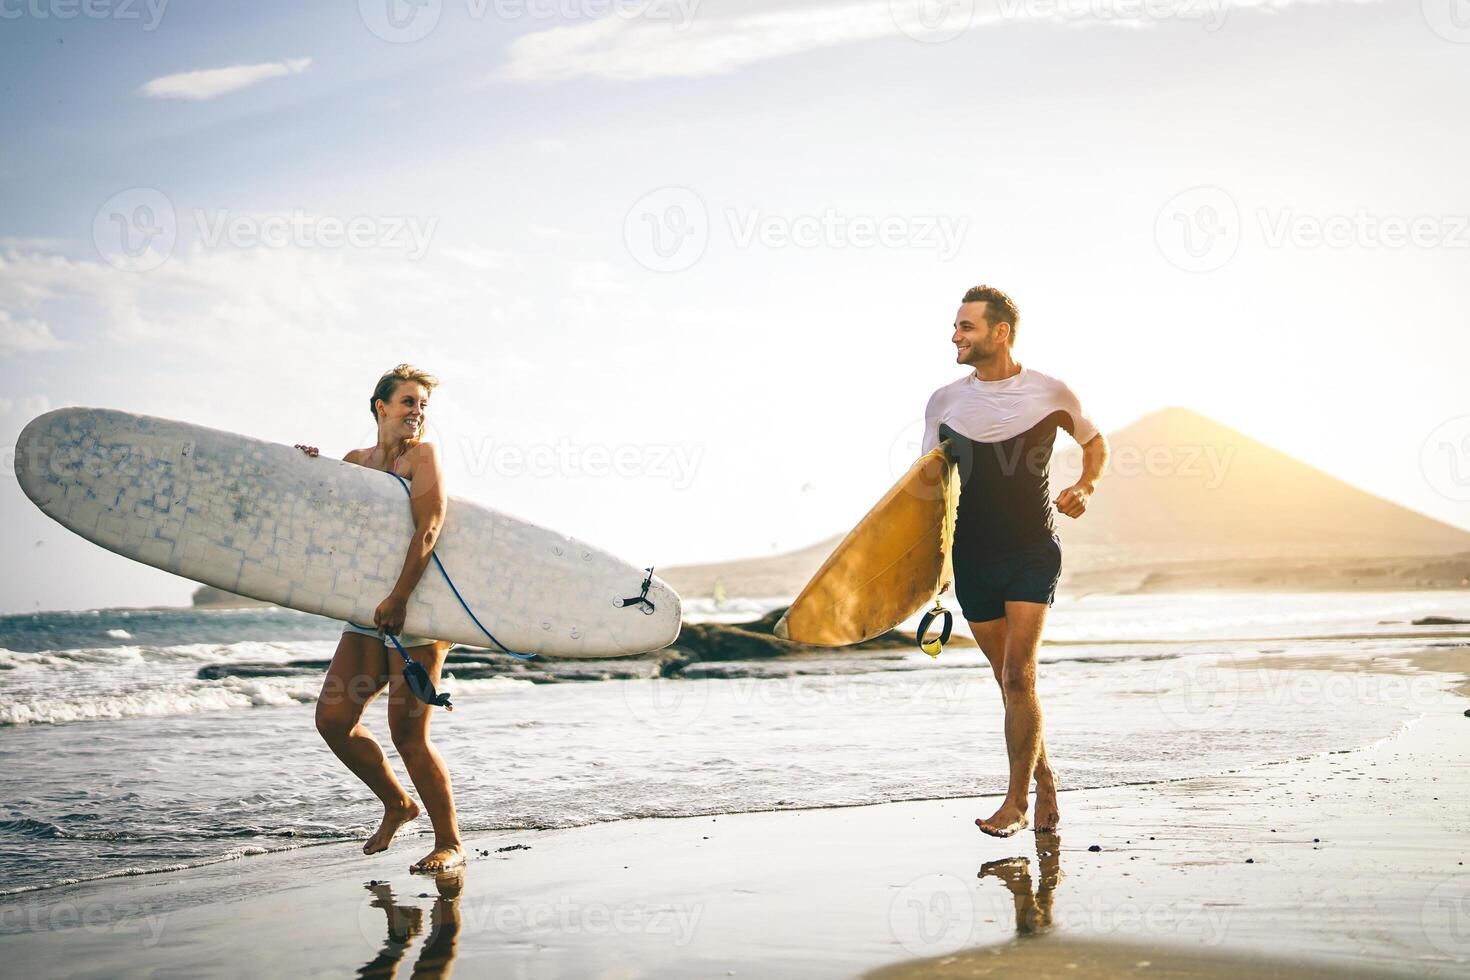 Young couple of surfers running with surfboards on the beach at sunset - Happy lovers going to surf together - People, sport and lifestyle concept - Vintage filter - Focus on woman board photo